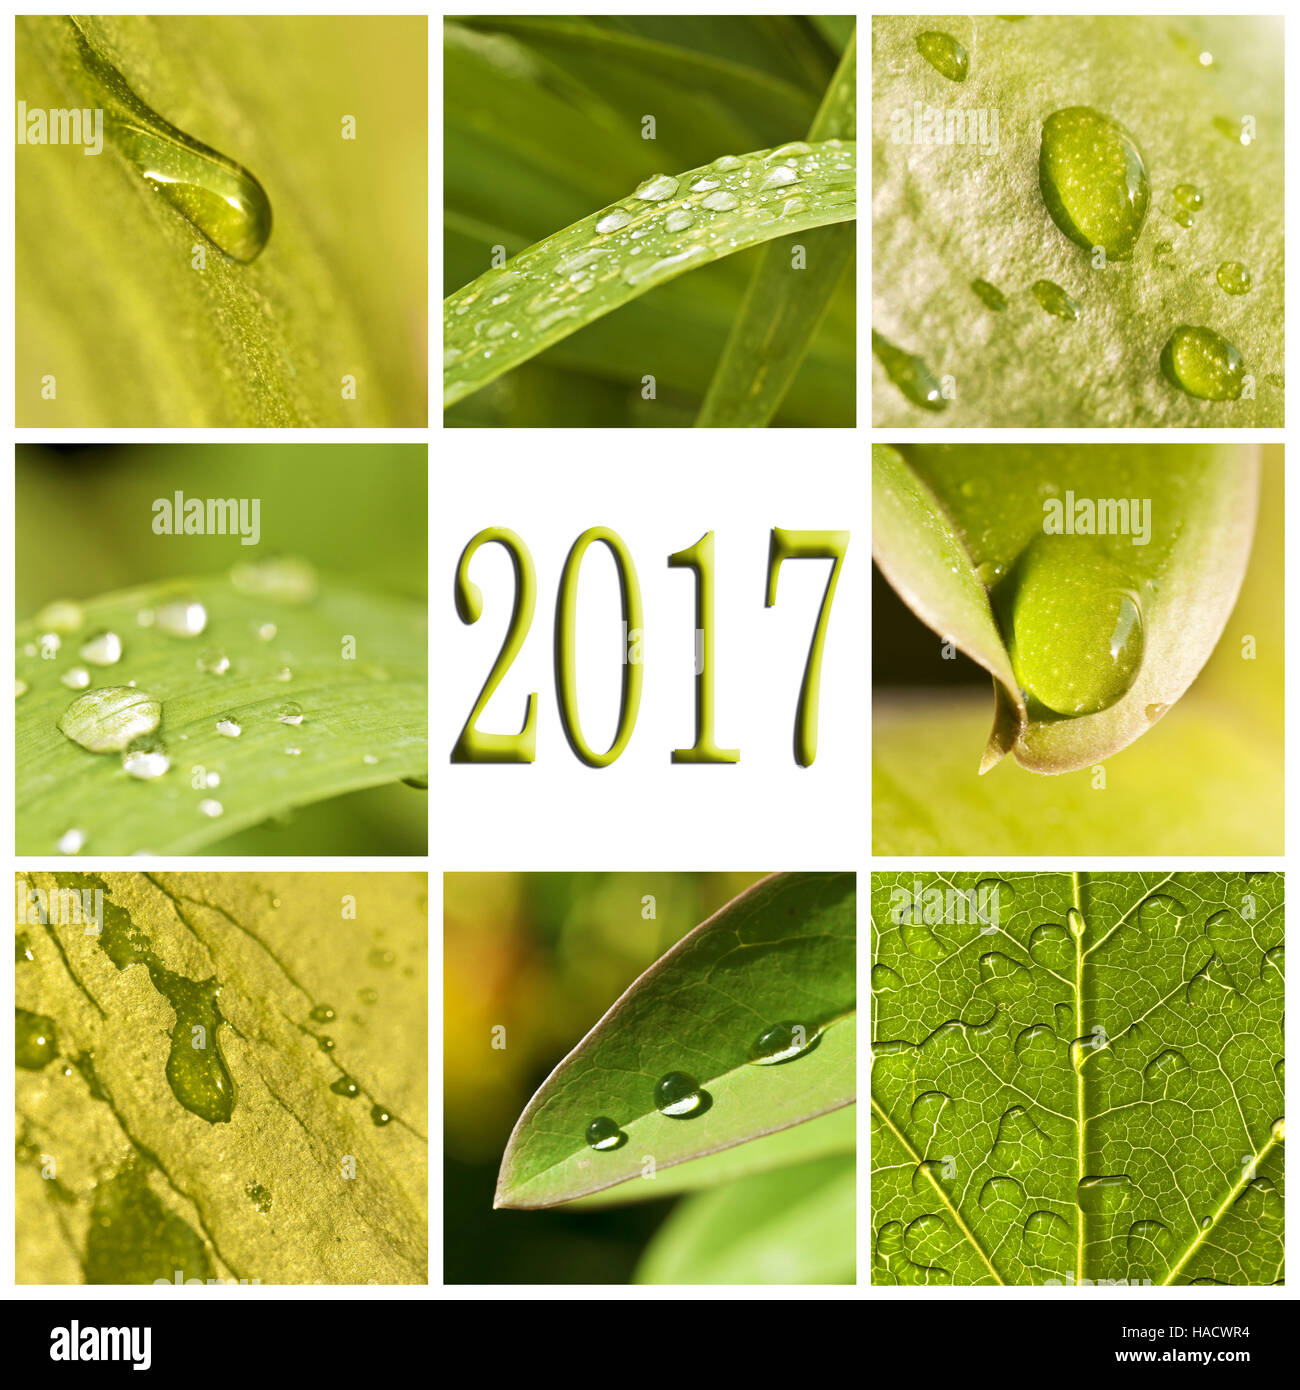 2017, green leaves and raindrops photo collage Stock Photo